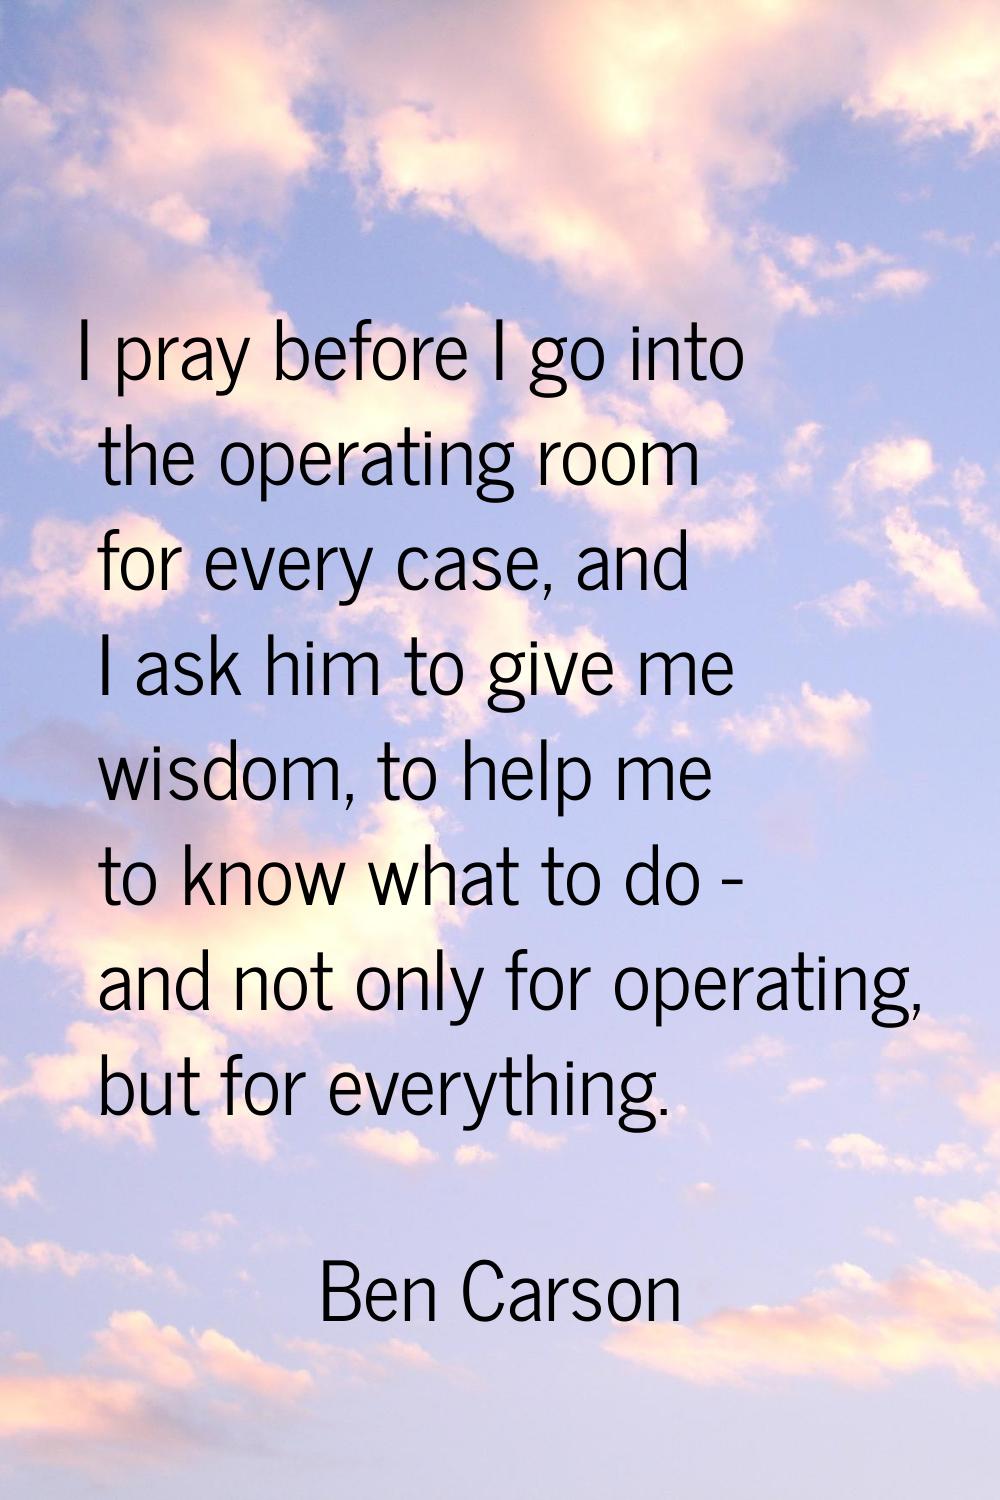 I pray before I go into the operating room for every case, and I ask him to give me wisdom, to help